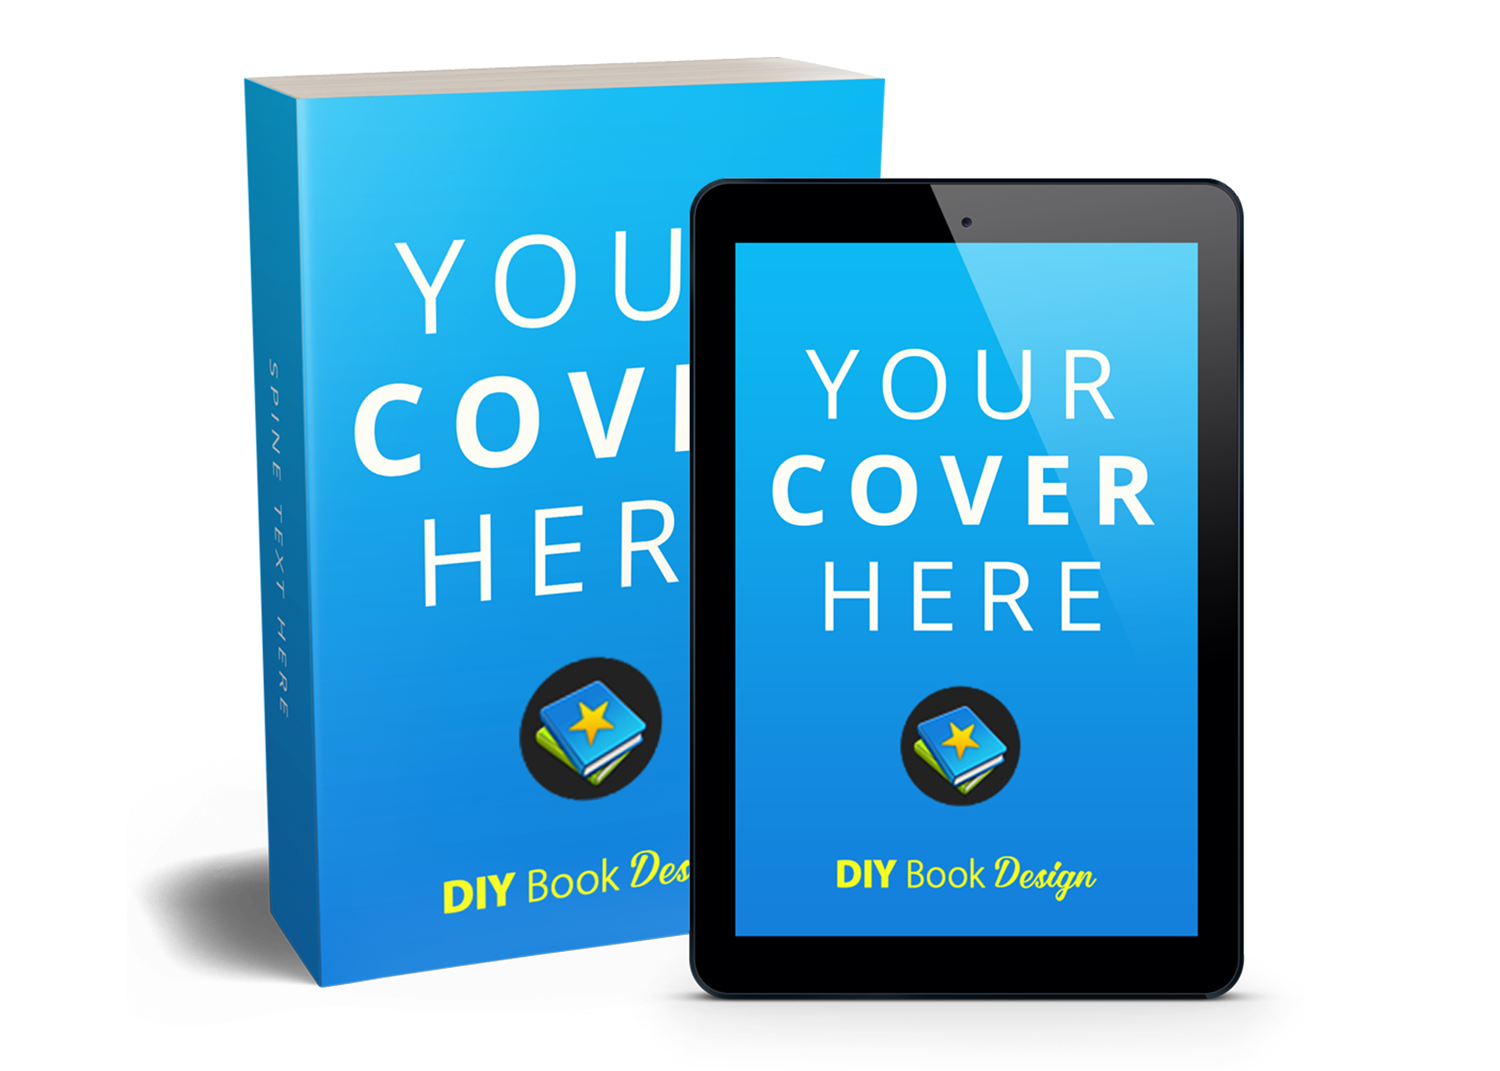 free ebook cover creator software download